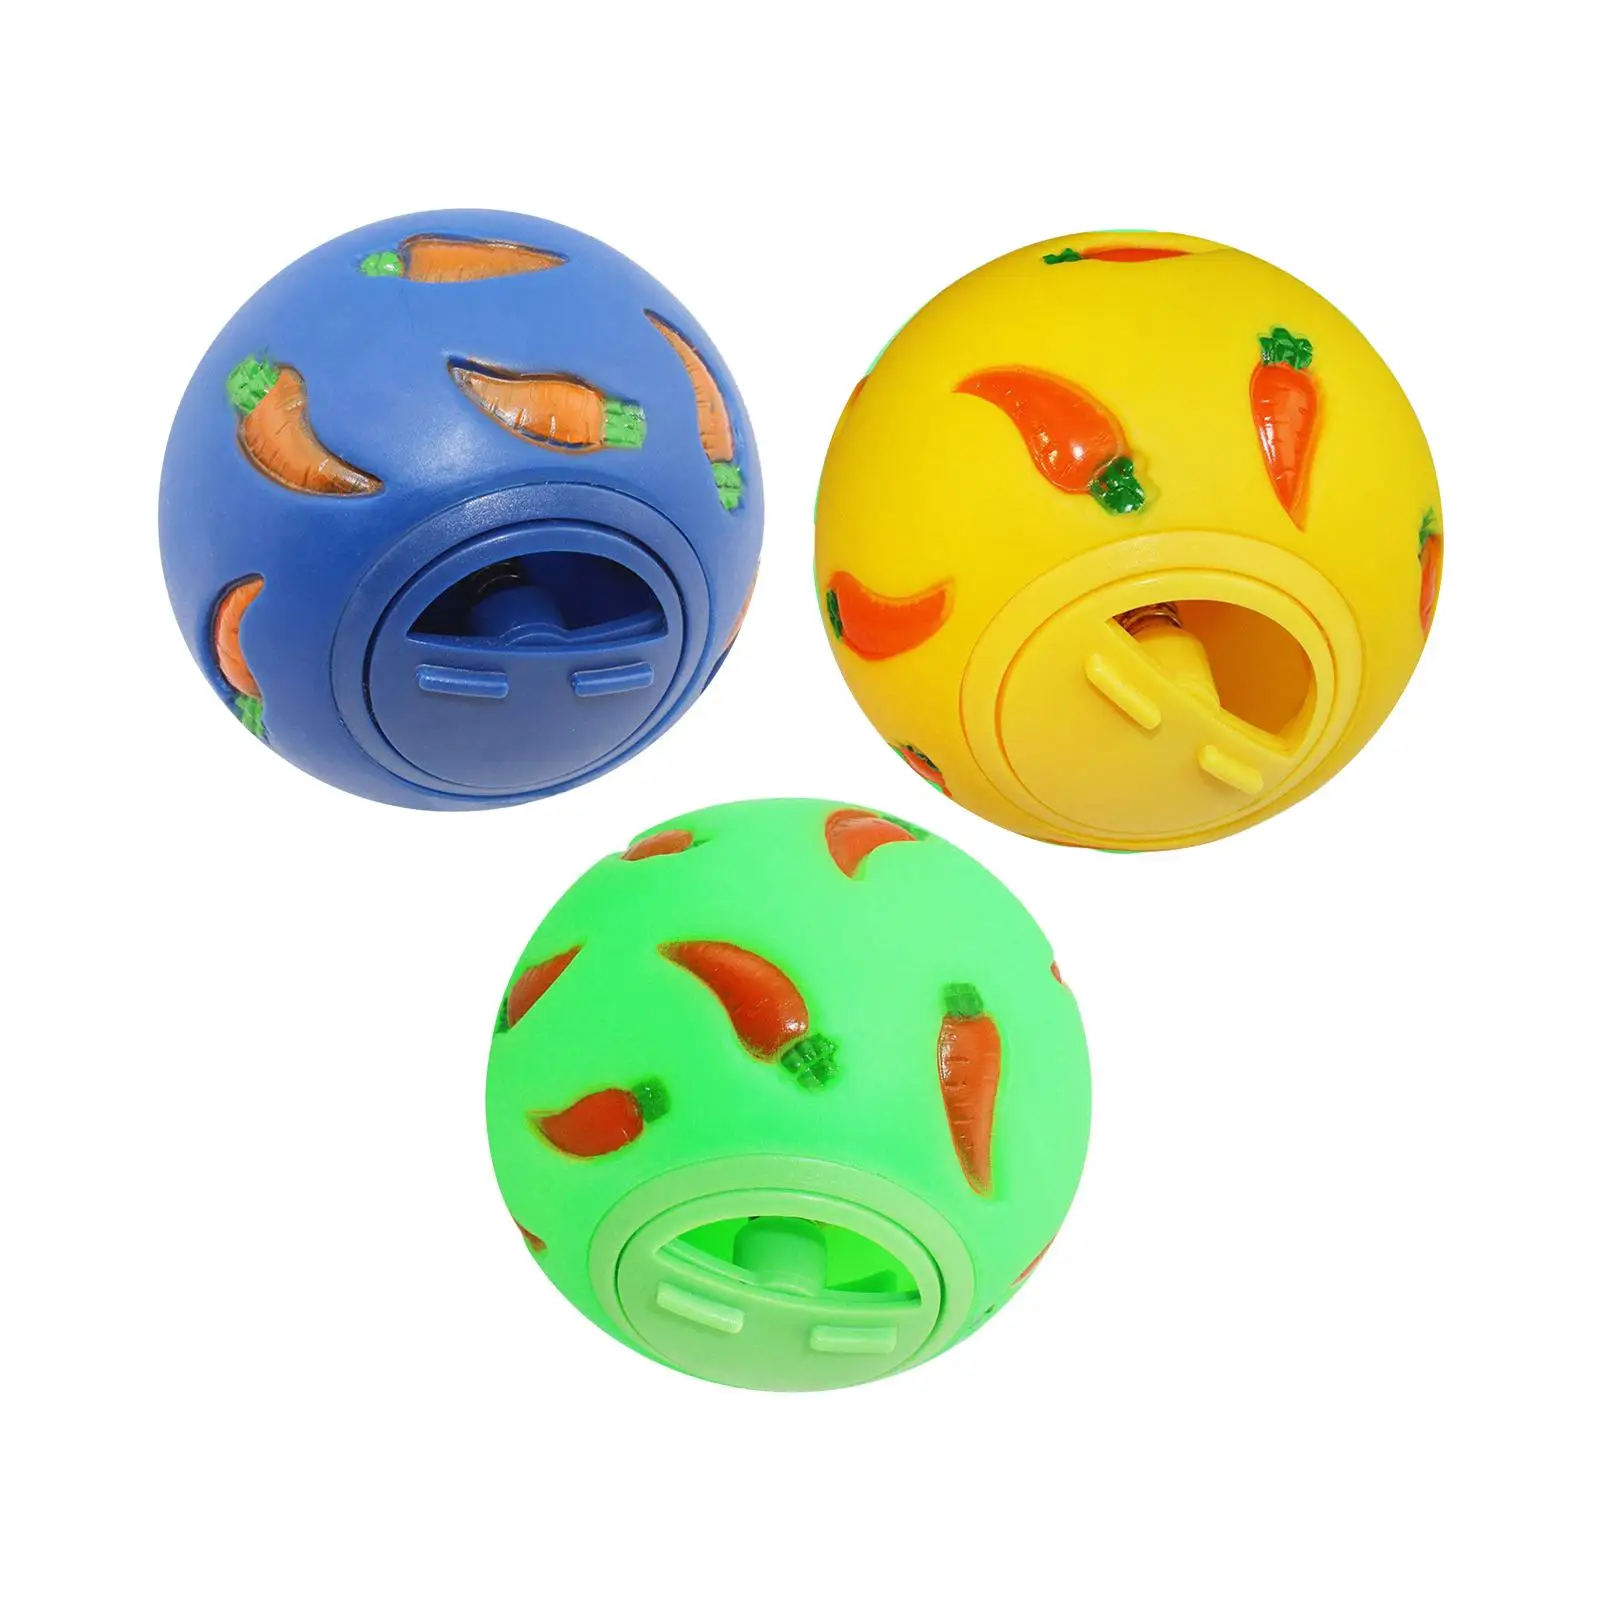 

Pet Slow Feeder Bowl Snack Toy Ball Interactive bunny toy for